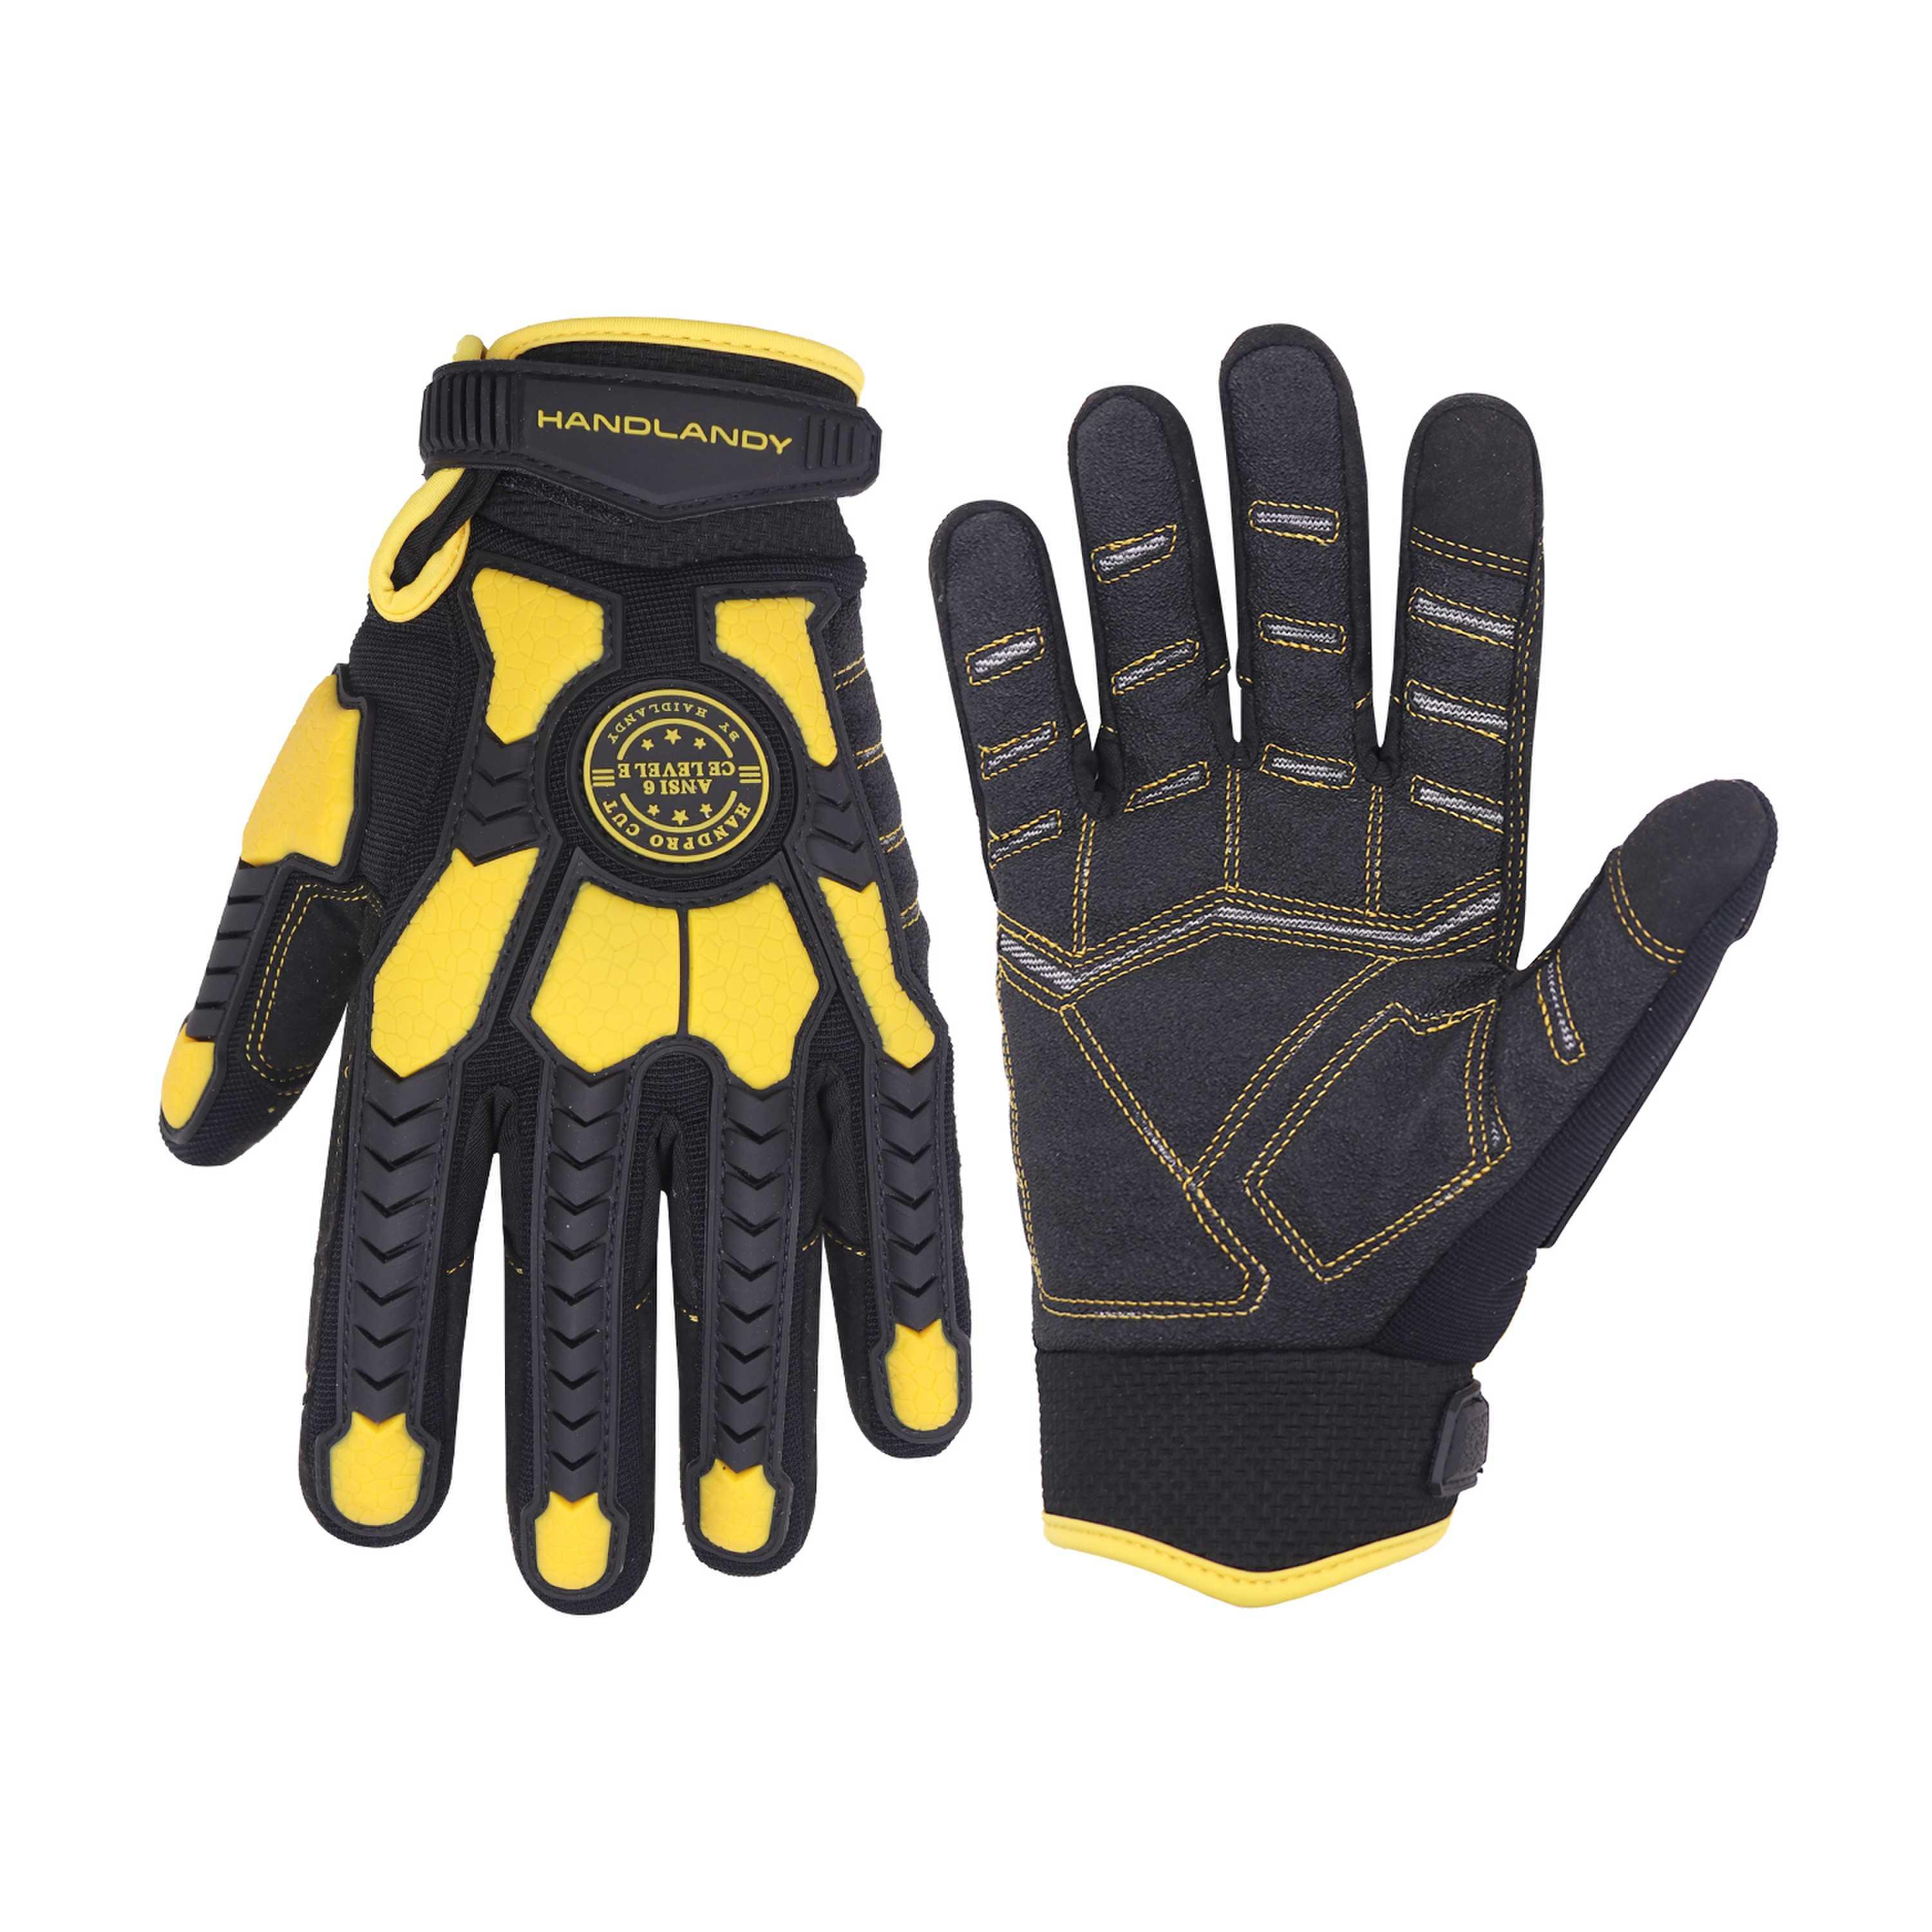 H688 PRISAFETY Construction Oilfield High Safety Resistant Gloves Super Grip Vibration-Resistant Oil and Gas cut 5 Impact Gloves